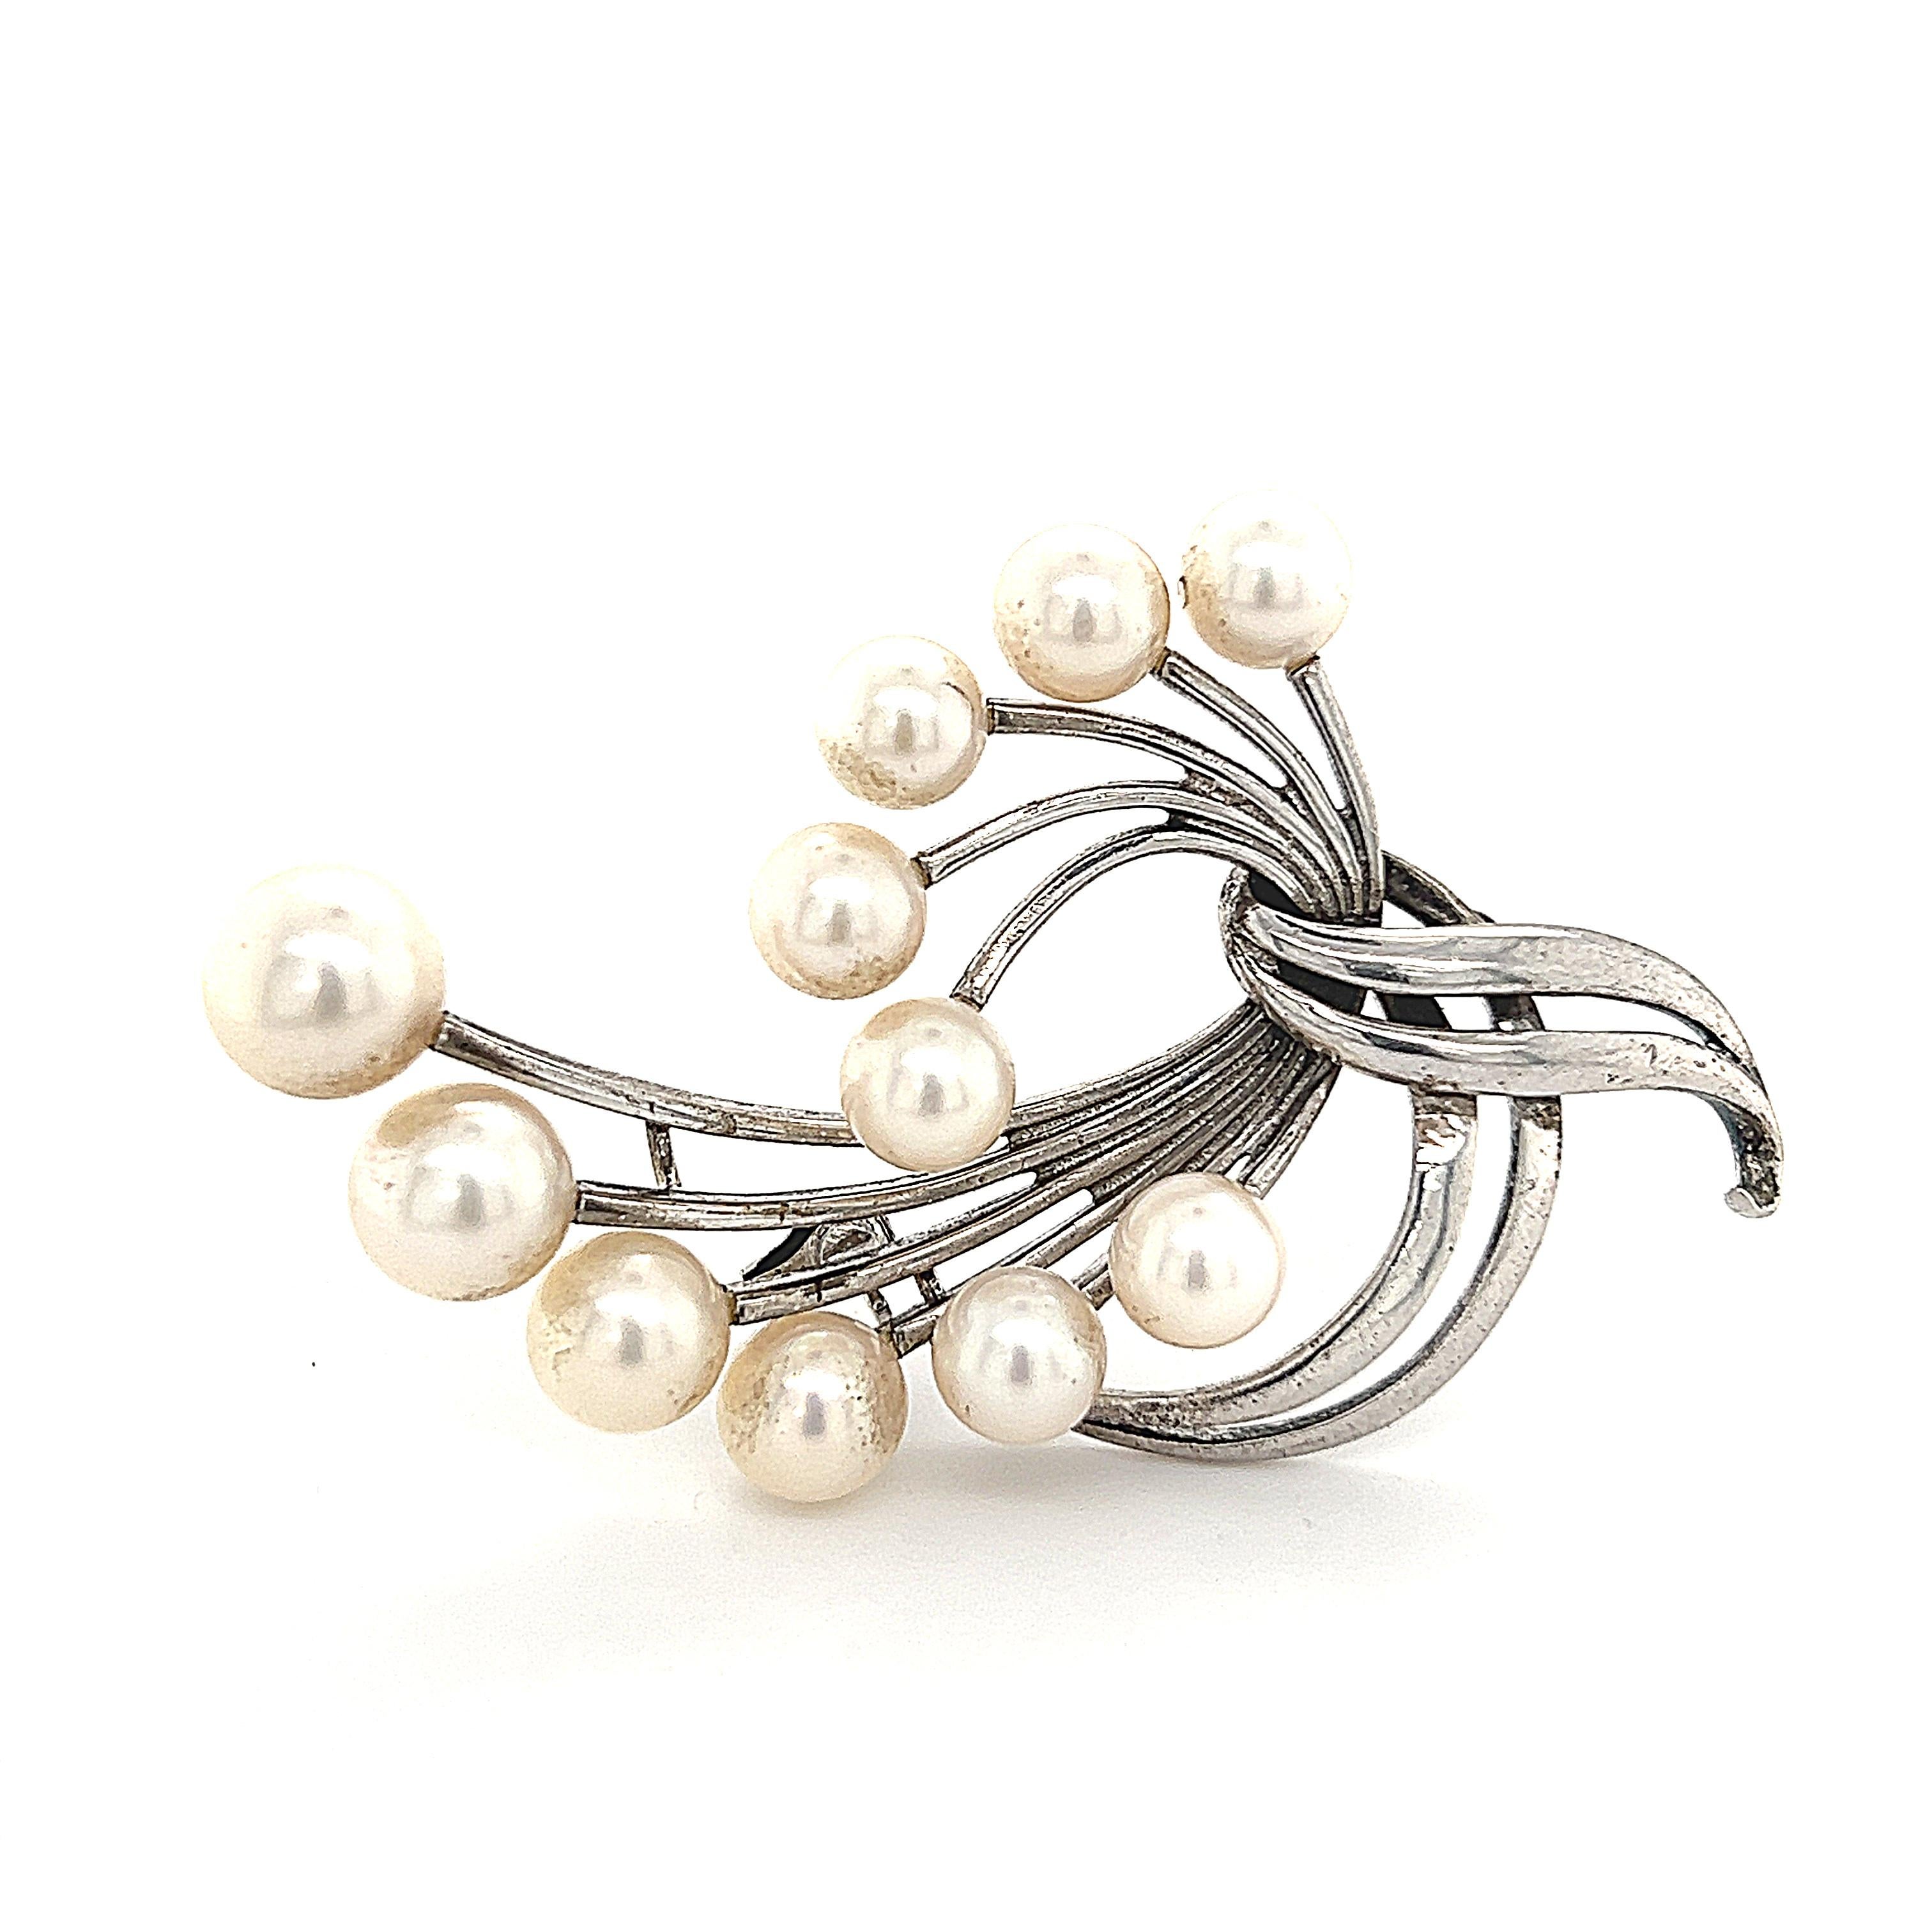 Mikimoto Estate Akoya Pearl Brooch Sterling Silver 6.6 mm 10.3g For Sale 3